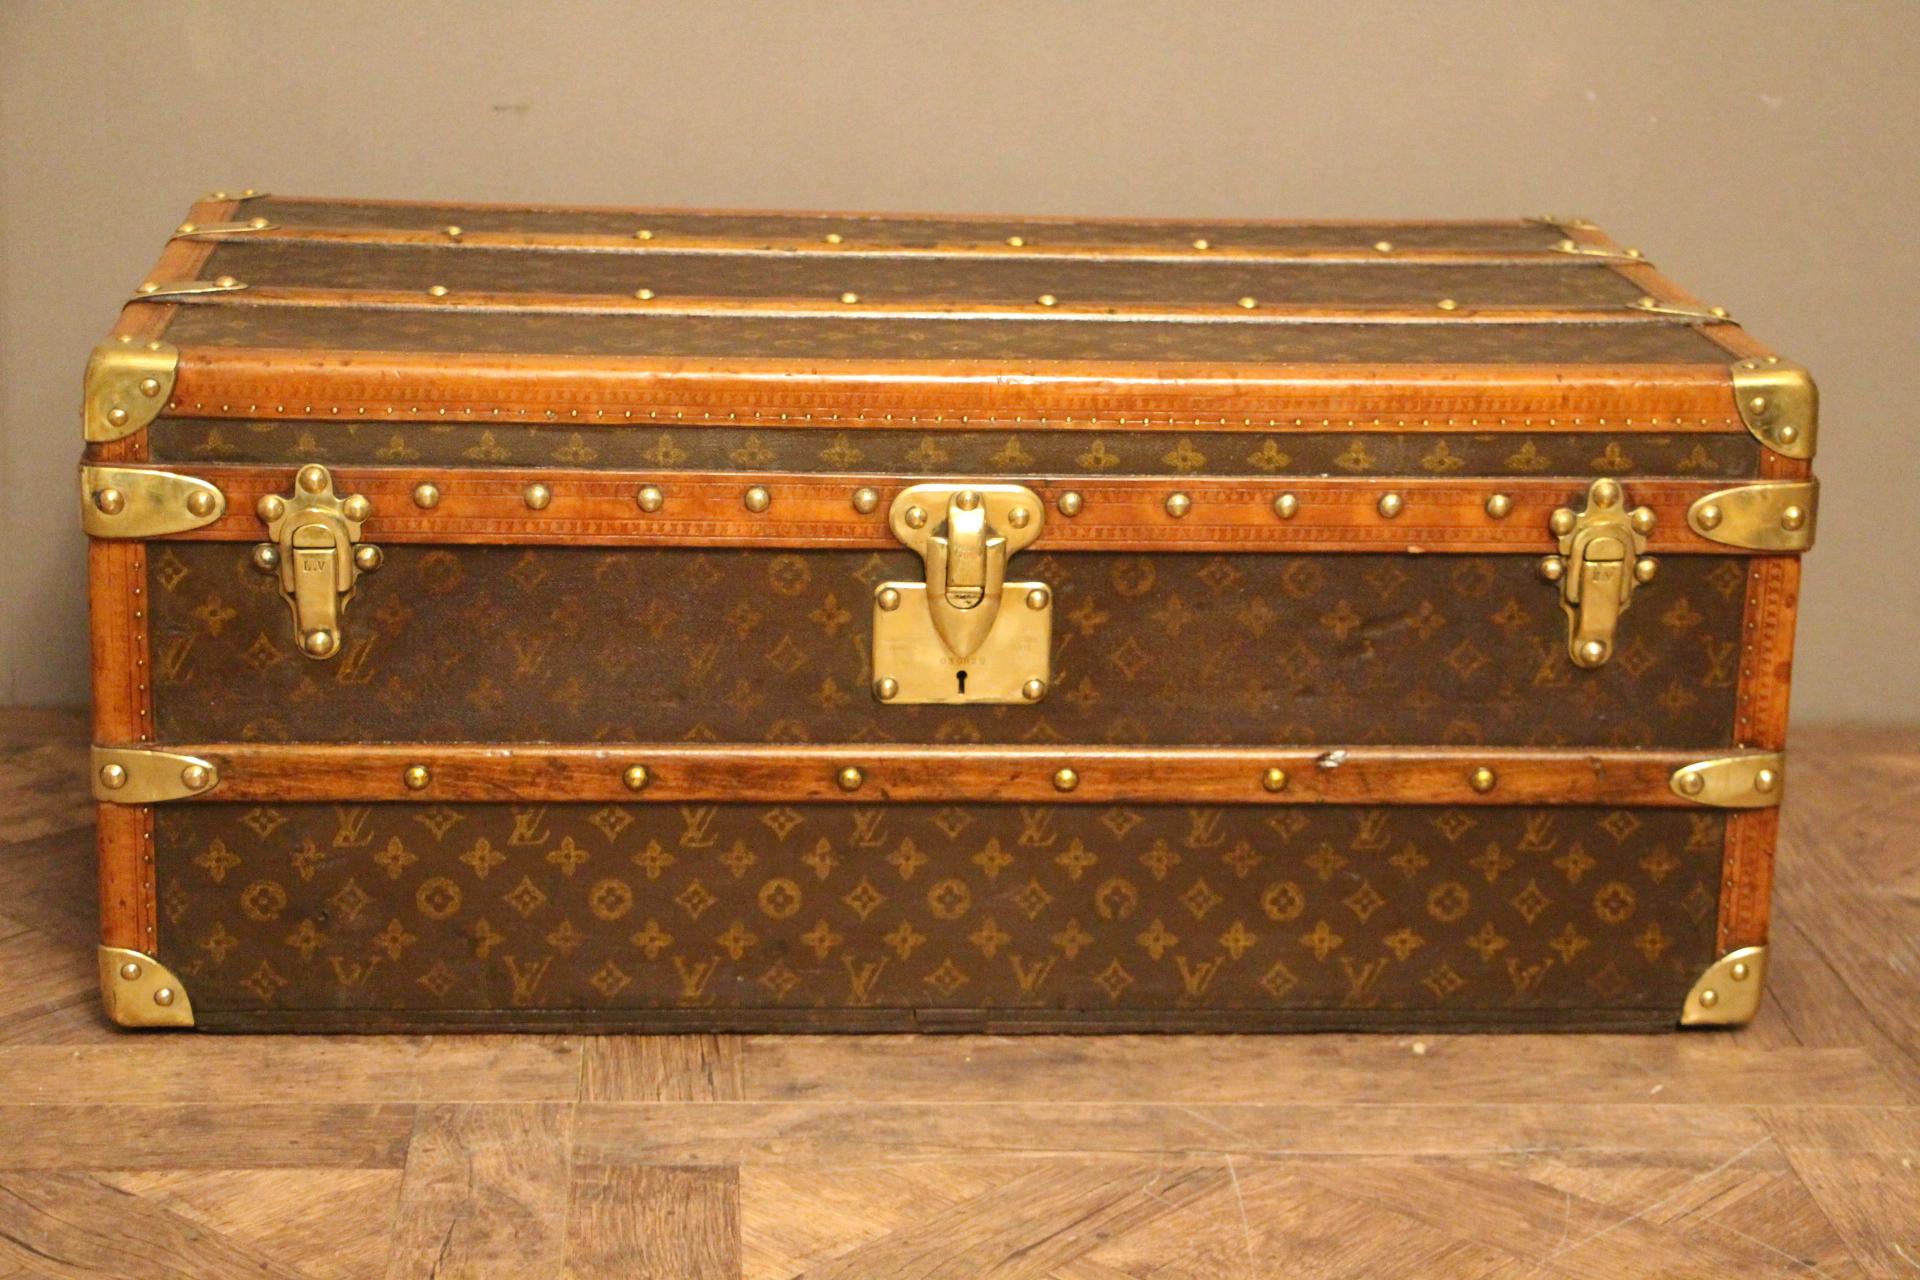 This beautiful Louis Vuitton cabin trunk features stencilled LV monogram canvas, LV stamped brass locks and studs, brass corners, leather side handles and lozine trim. Pink and white customised painted stribes on its sides.
Inside is all original